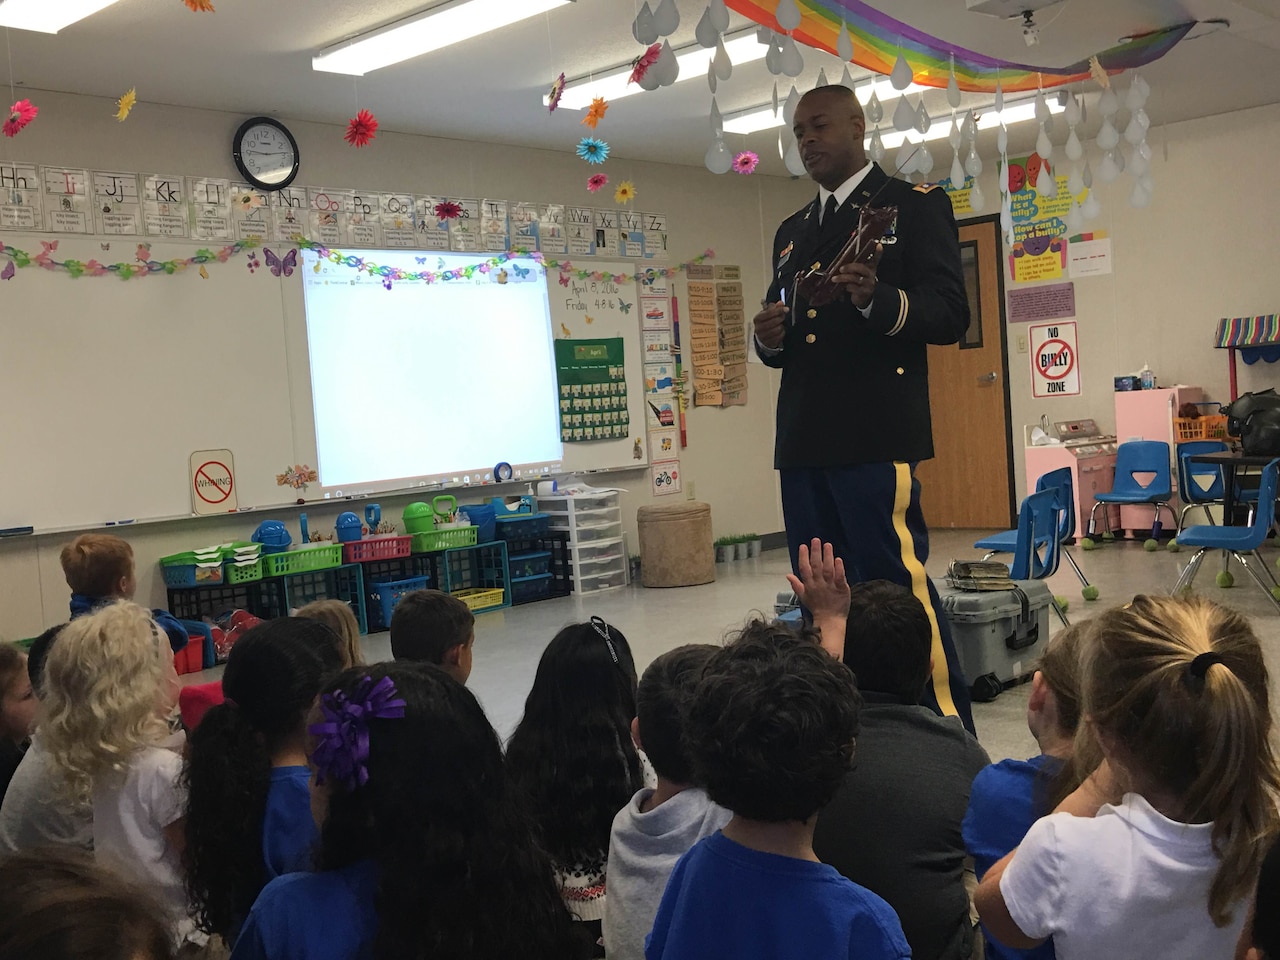 Dedicated to giving back to the community and inspiring a younger generation, Army Lt. Col. Al Niles Jr., an acquisition officer, speaks to a kindergarten class at Saint Cloud Preparatory Academy in Saint Cloud, Fla. He logged more than 250 hours of community service during his time with the Army’s Training With Industry program, supporting veterans' organizations, schools and youth programs. Courtesy photo by Tamara Carpenter